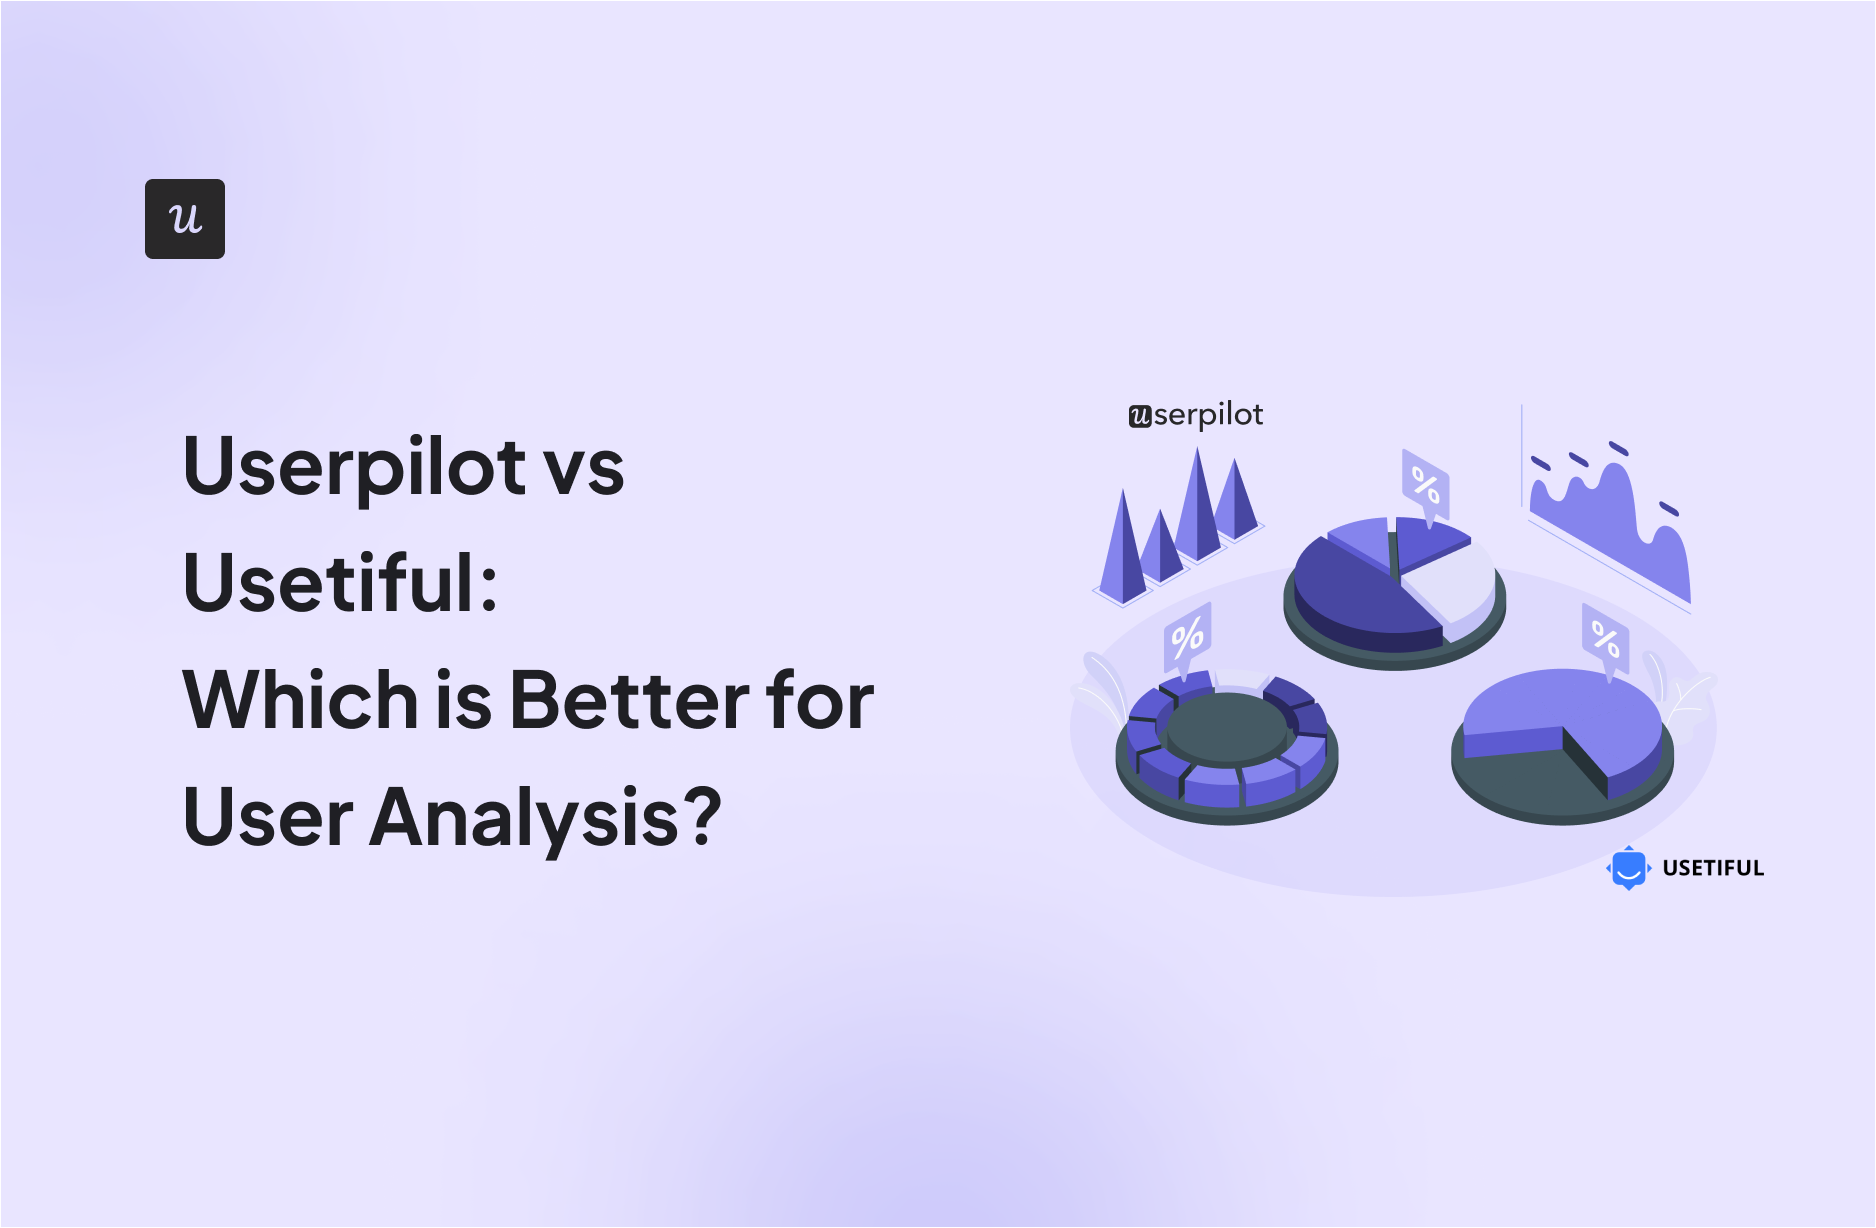 Userpilot vs Usetiful: Which is Better for User Analysis?